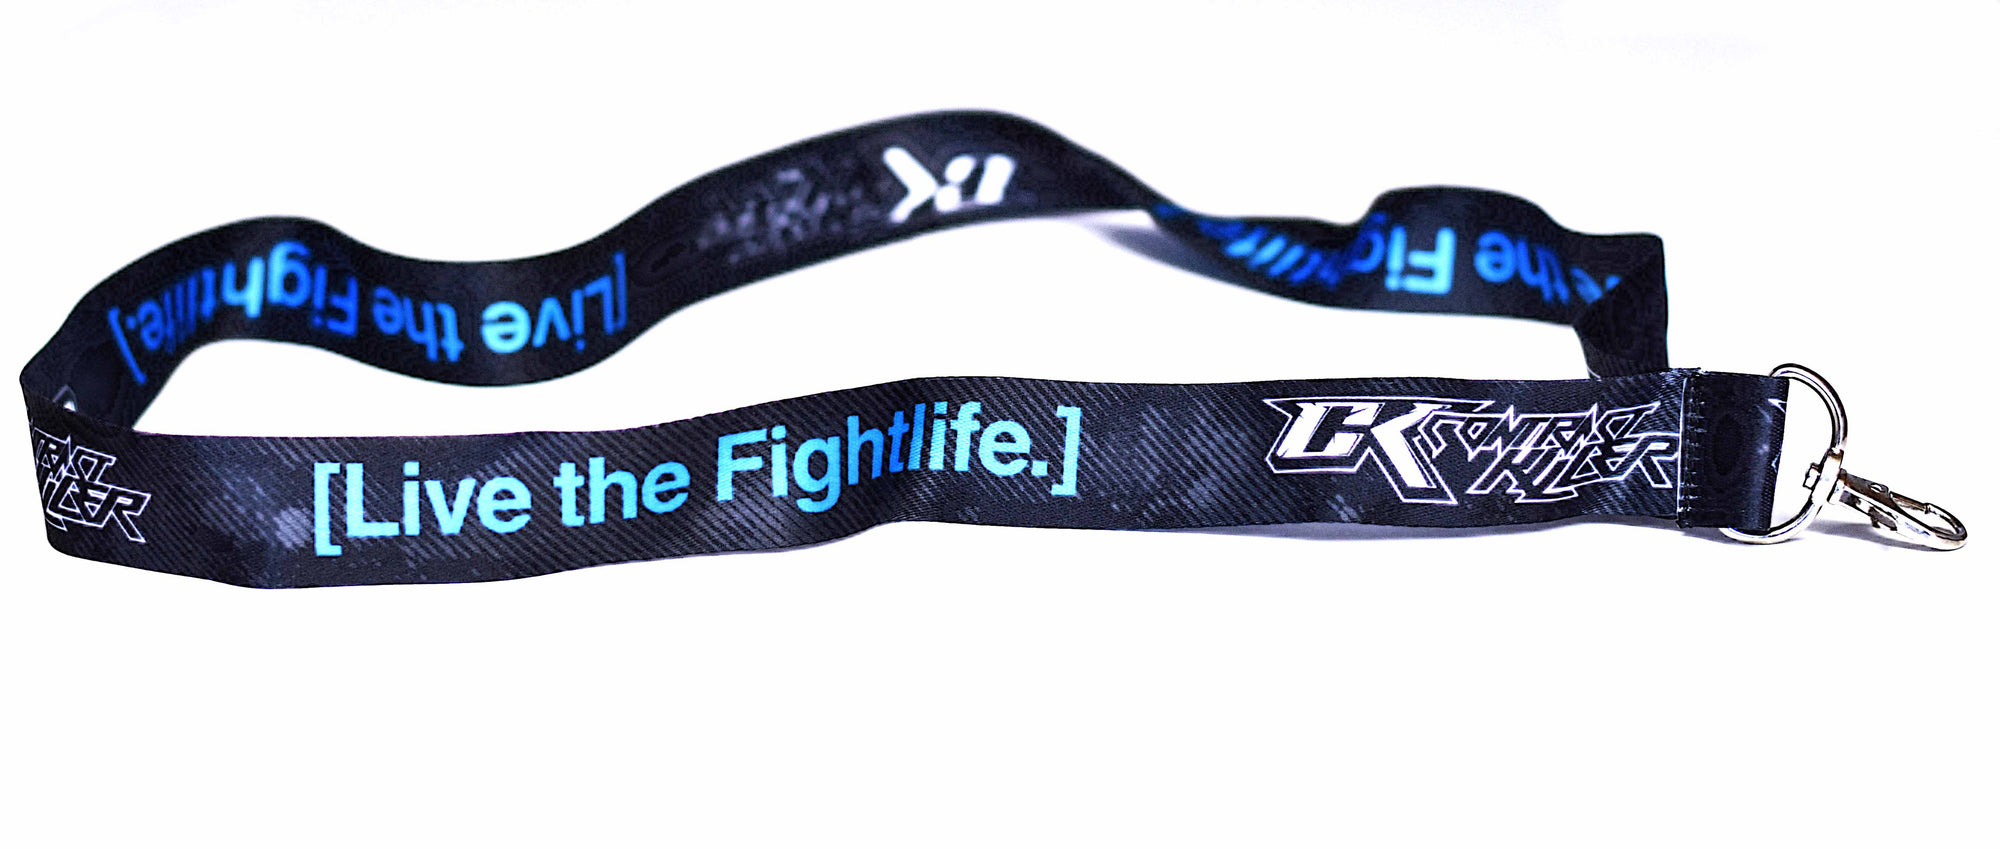 CK Live The Fight Life Lanyard